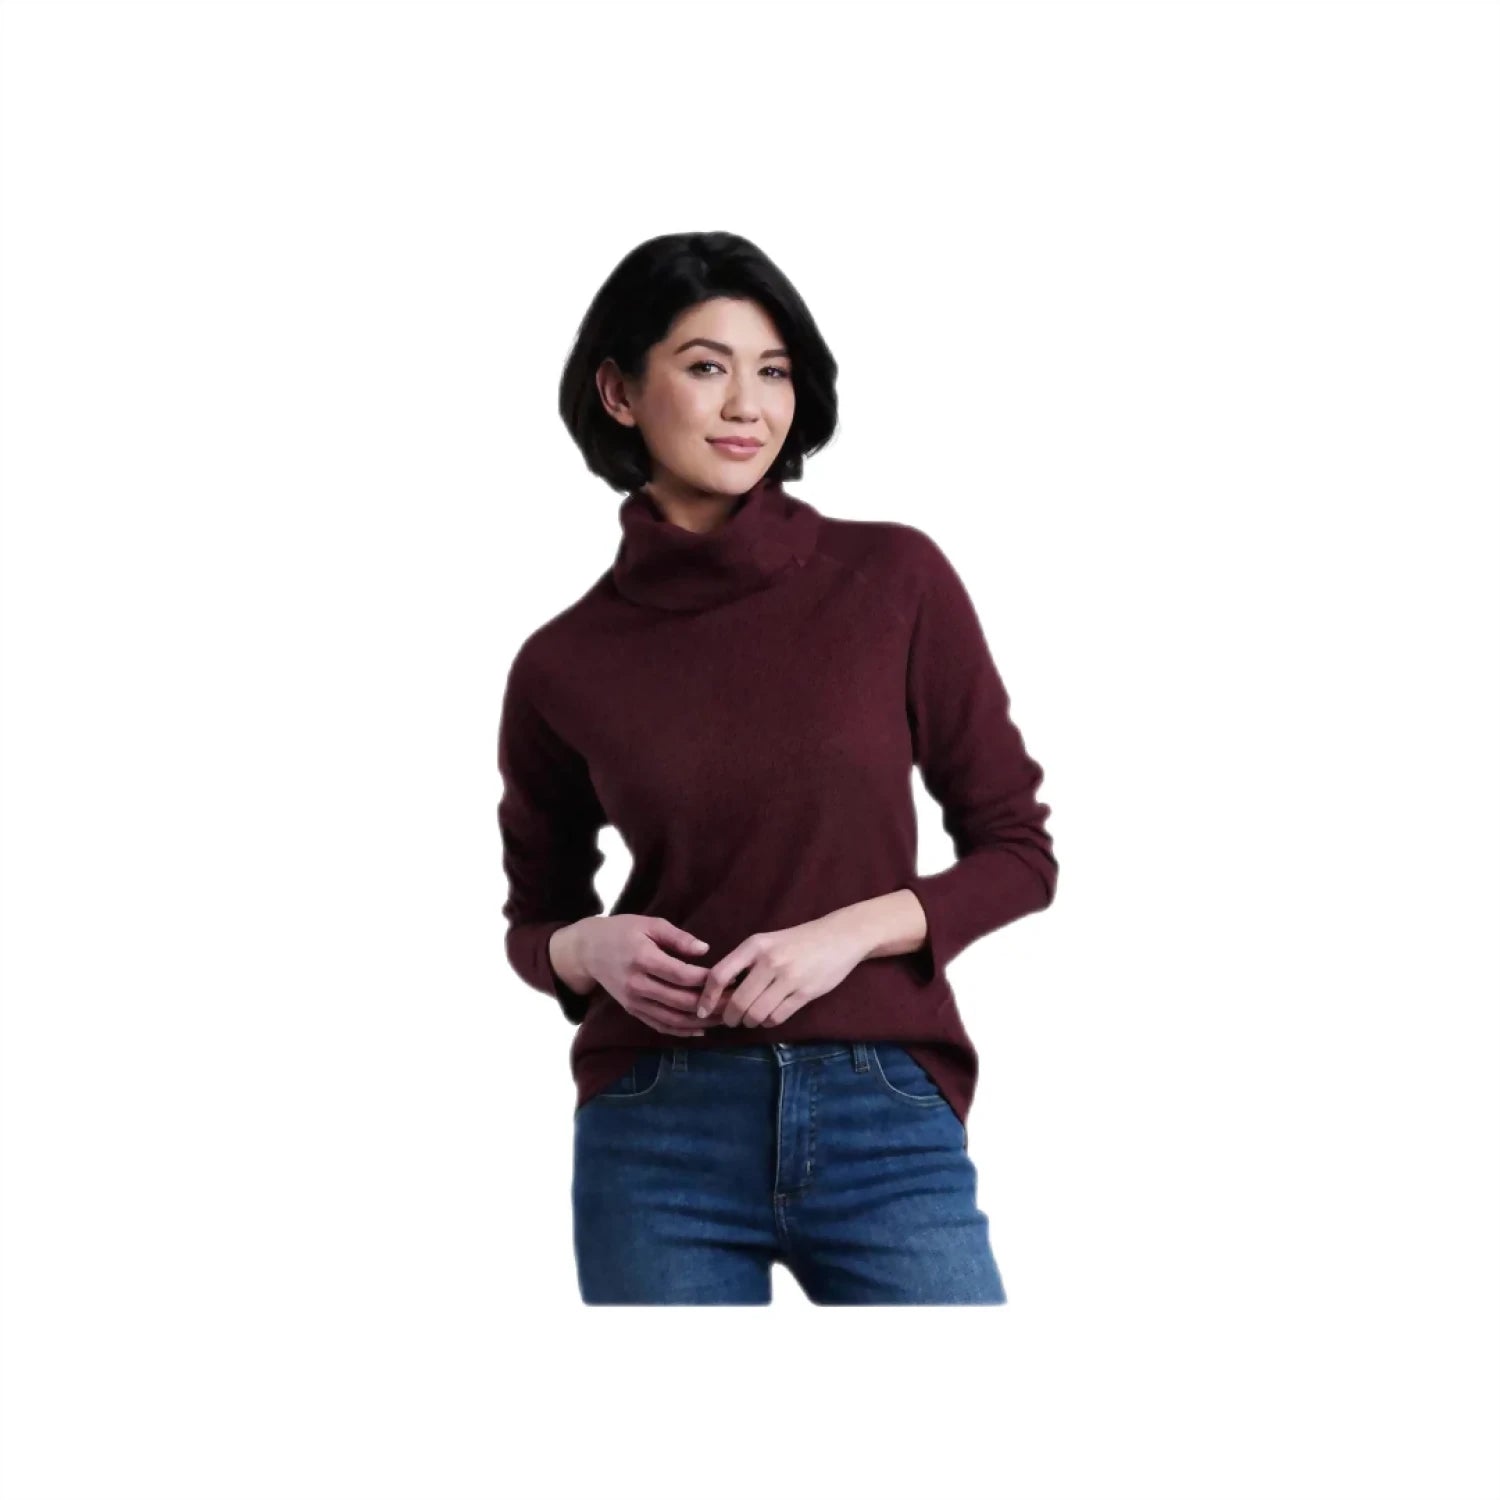 Kuhl Women's PETRA™ Turtleneck shown on model in the Zinfandel color option. Front view.